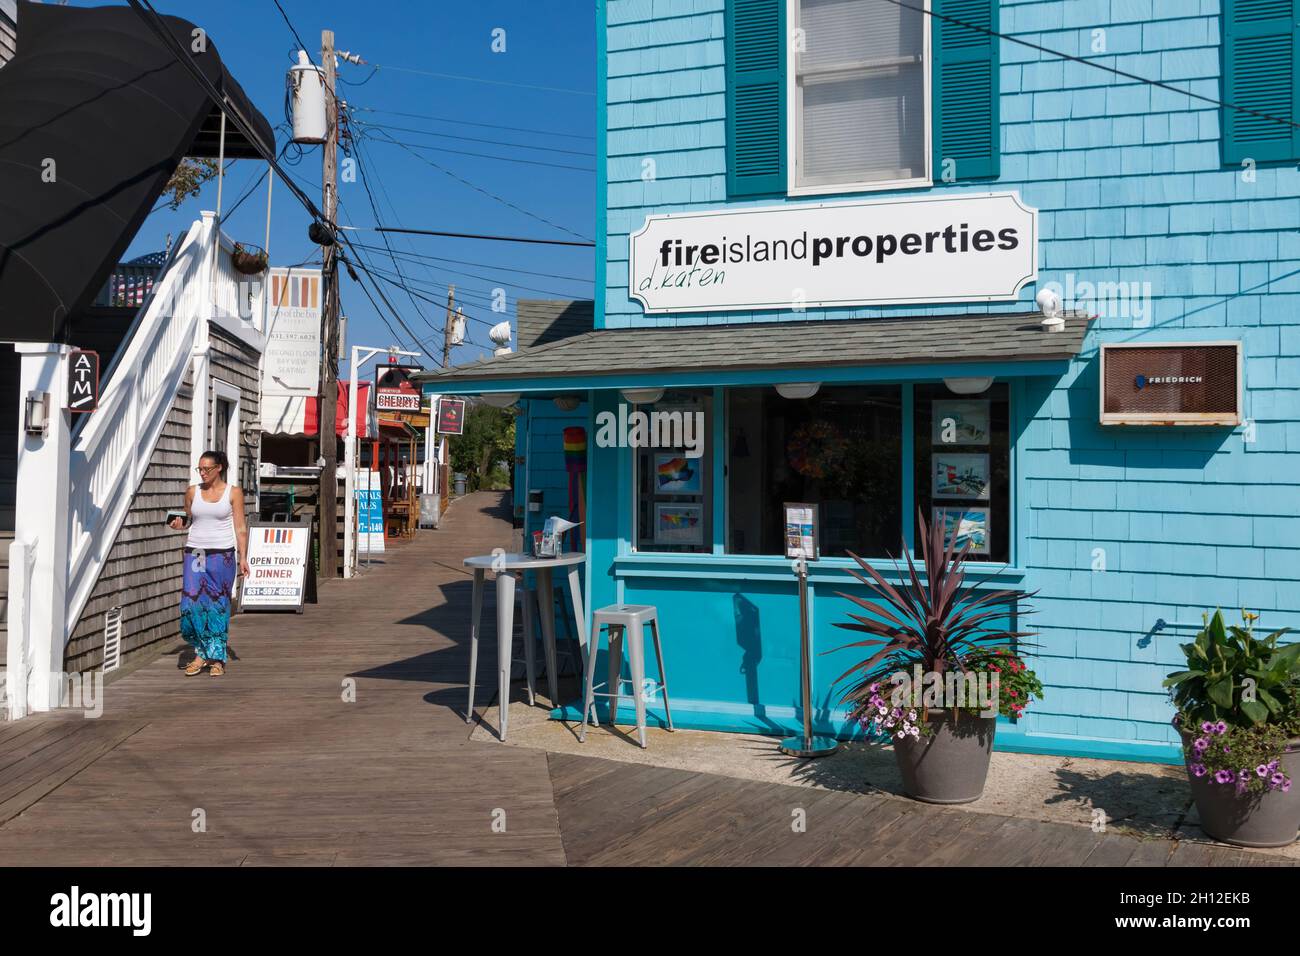 Central business district in the town of Cherry Grove, Fire Island, Suffolk County, New York, USA. Stock Photo